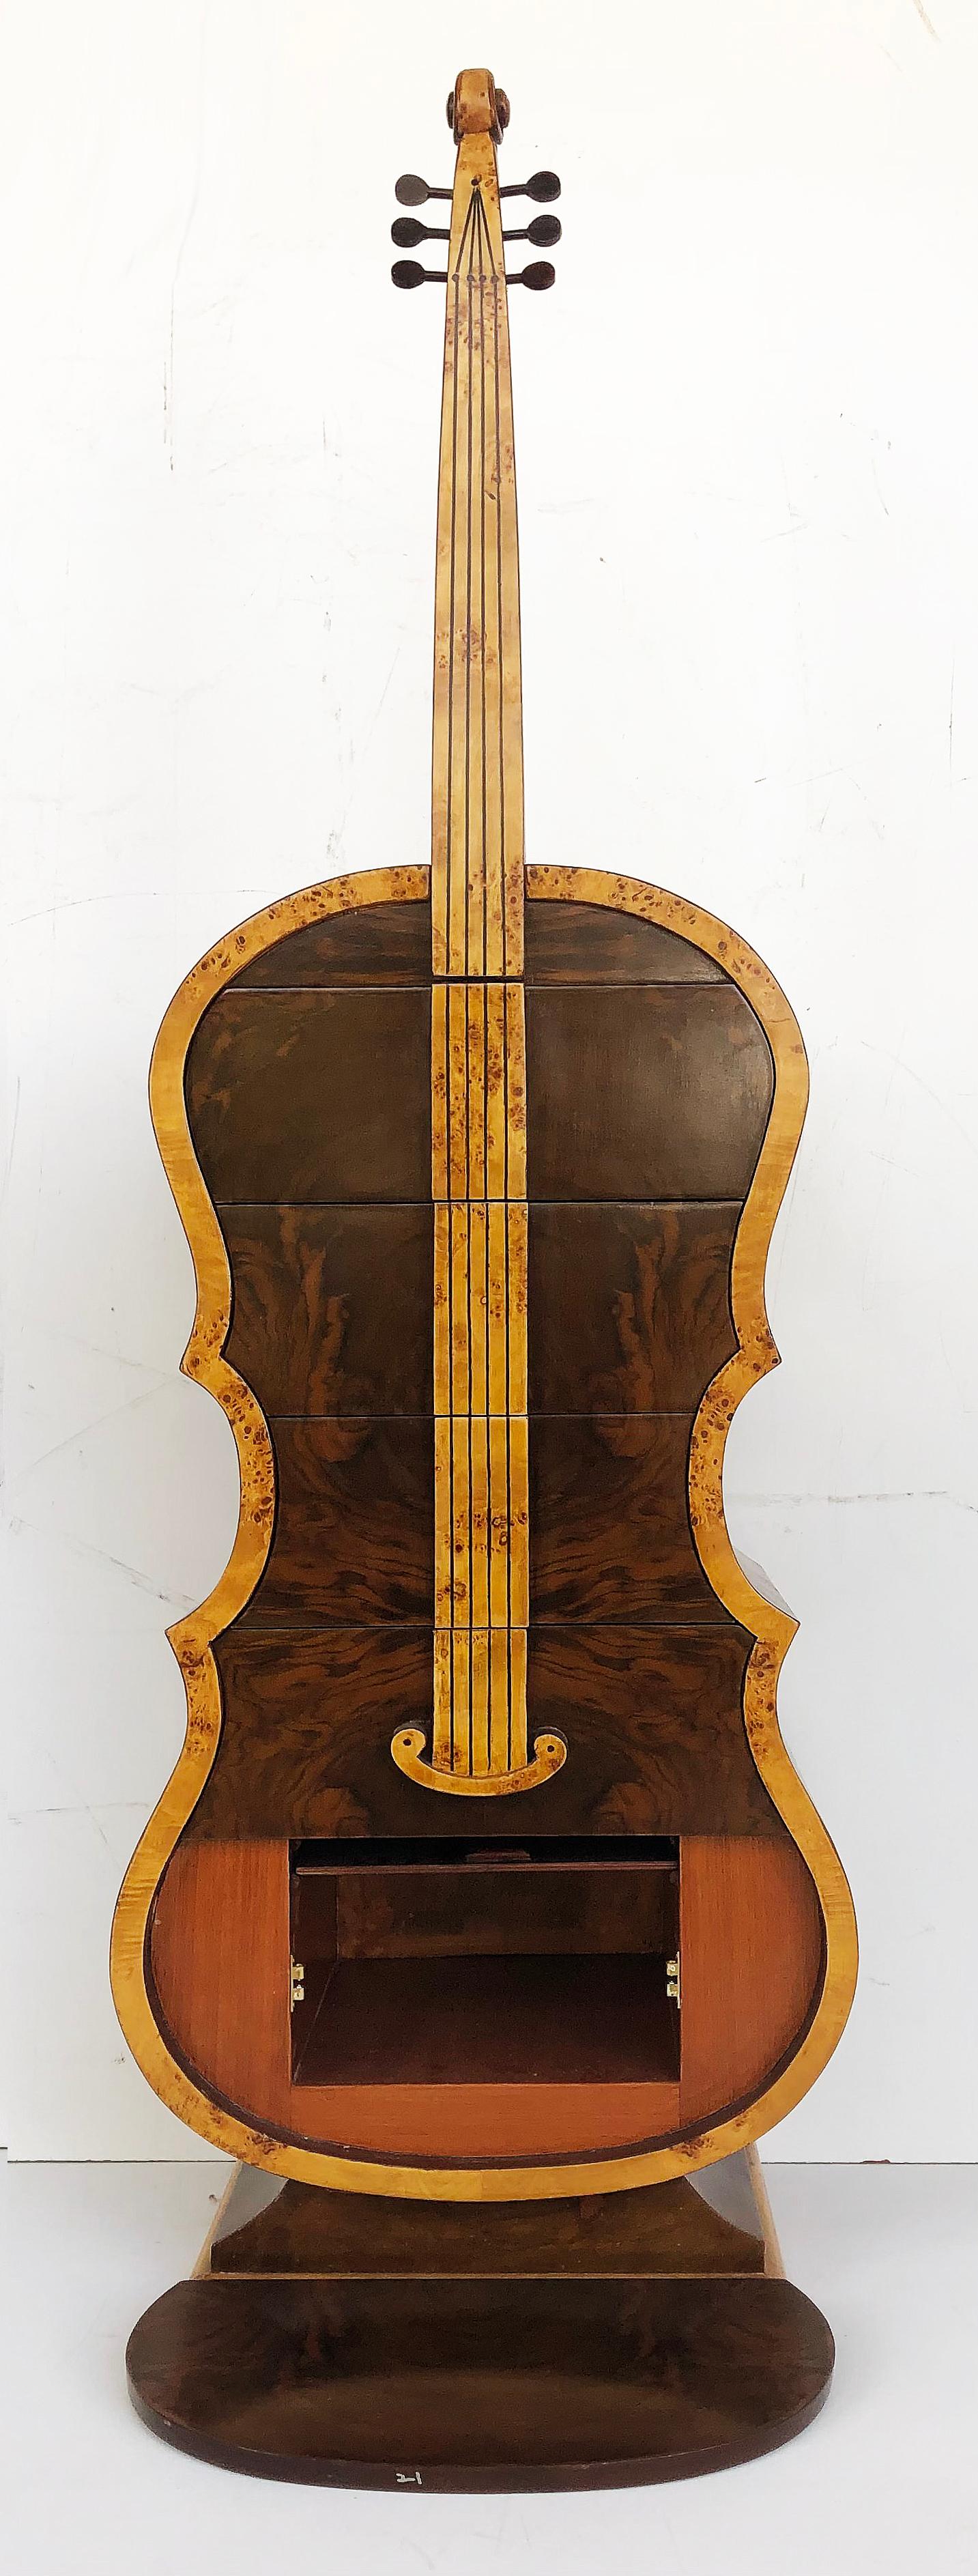 Art Deco-Style Whimsical Burl Wood Cello Shaped Cabinet with Secret Compartment 1